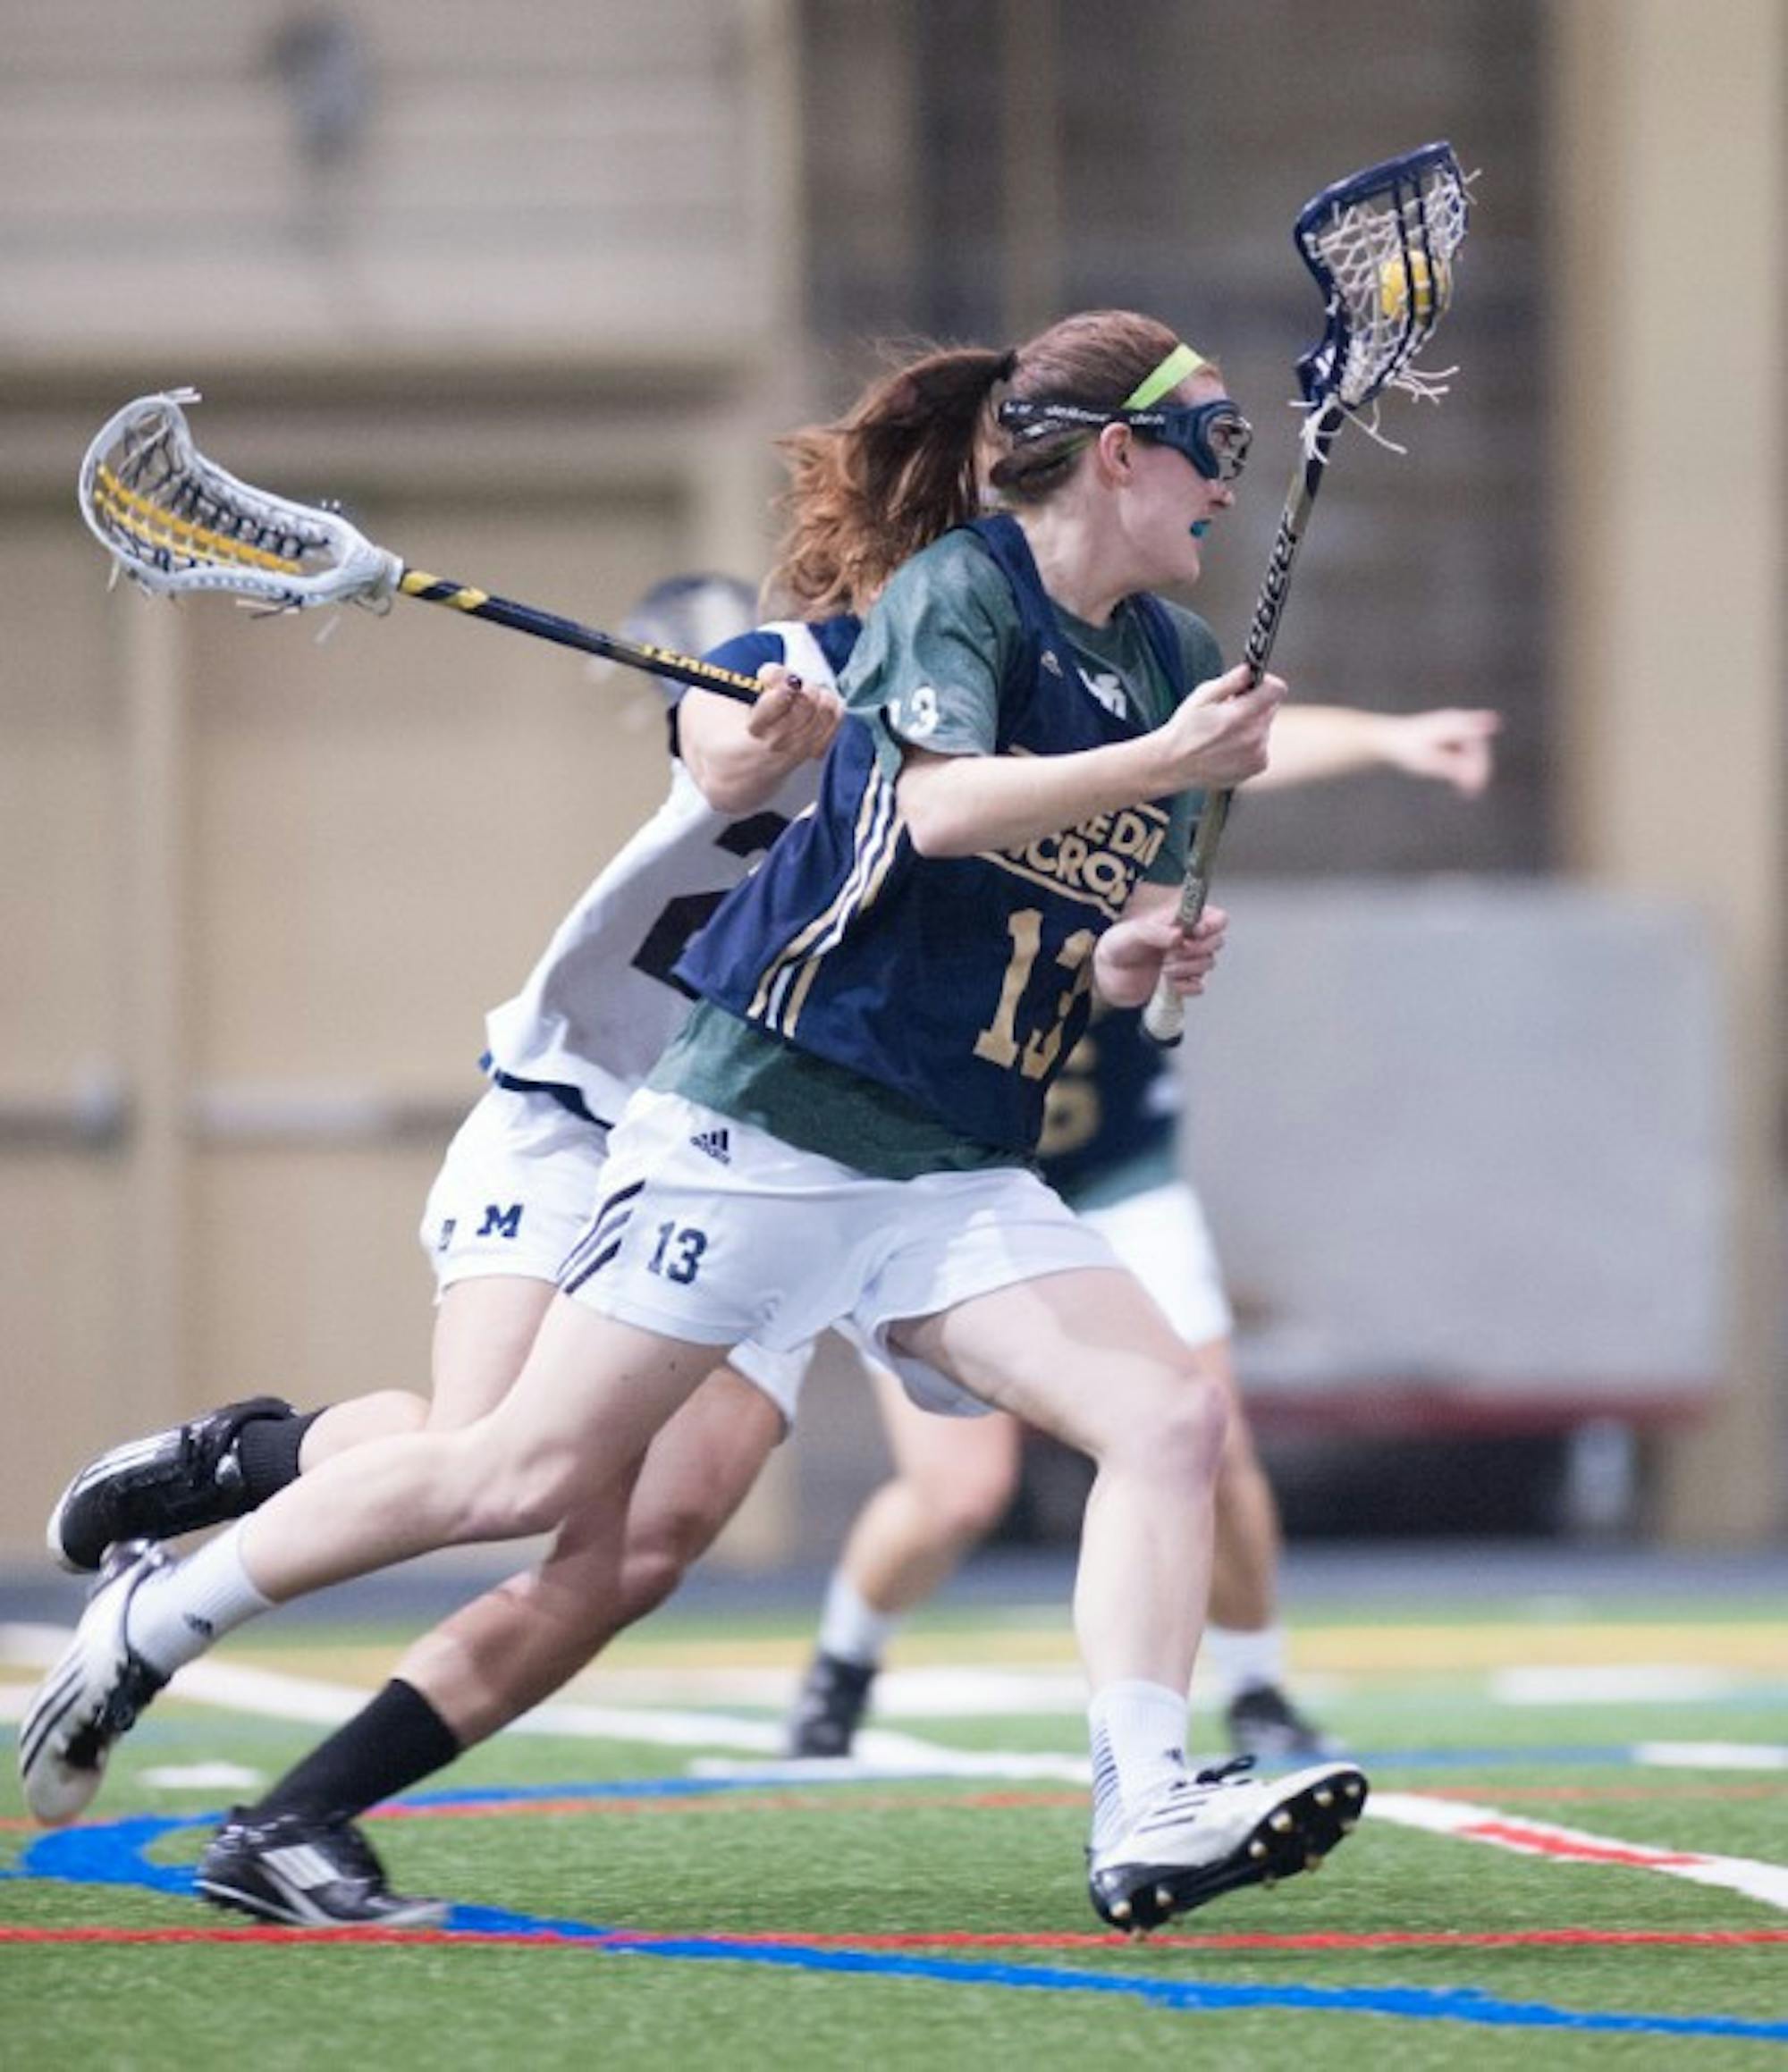 Notre Dame junior midfielder Caitlin Gargan carries the ball for Notre Dame while she looks to score during Notre Dame's 19-7 scrimmage win over Michigan on Saturday. Gargan returns as one of the last season's top scorers, as she finished 2013 with 19 goals and five assists for the Irish.